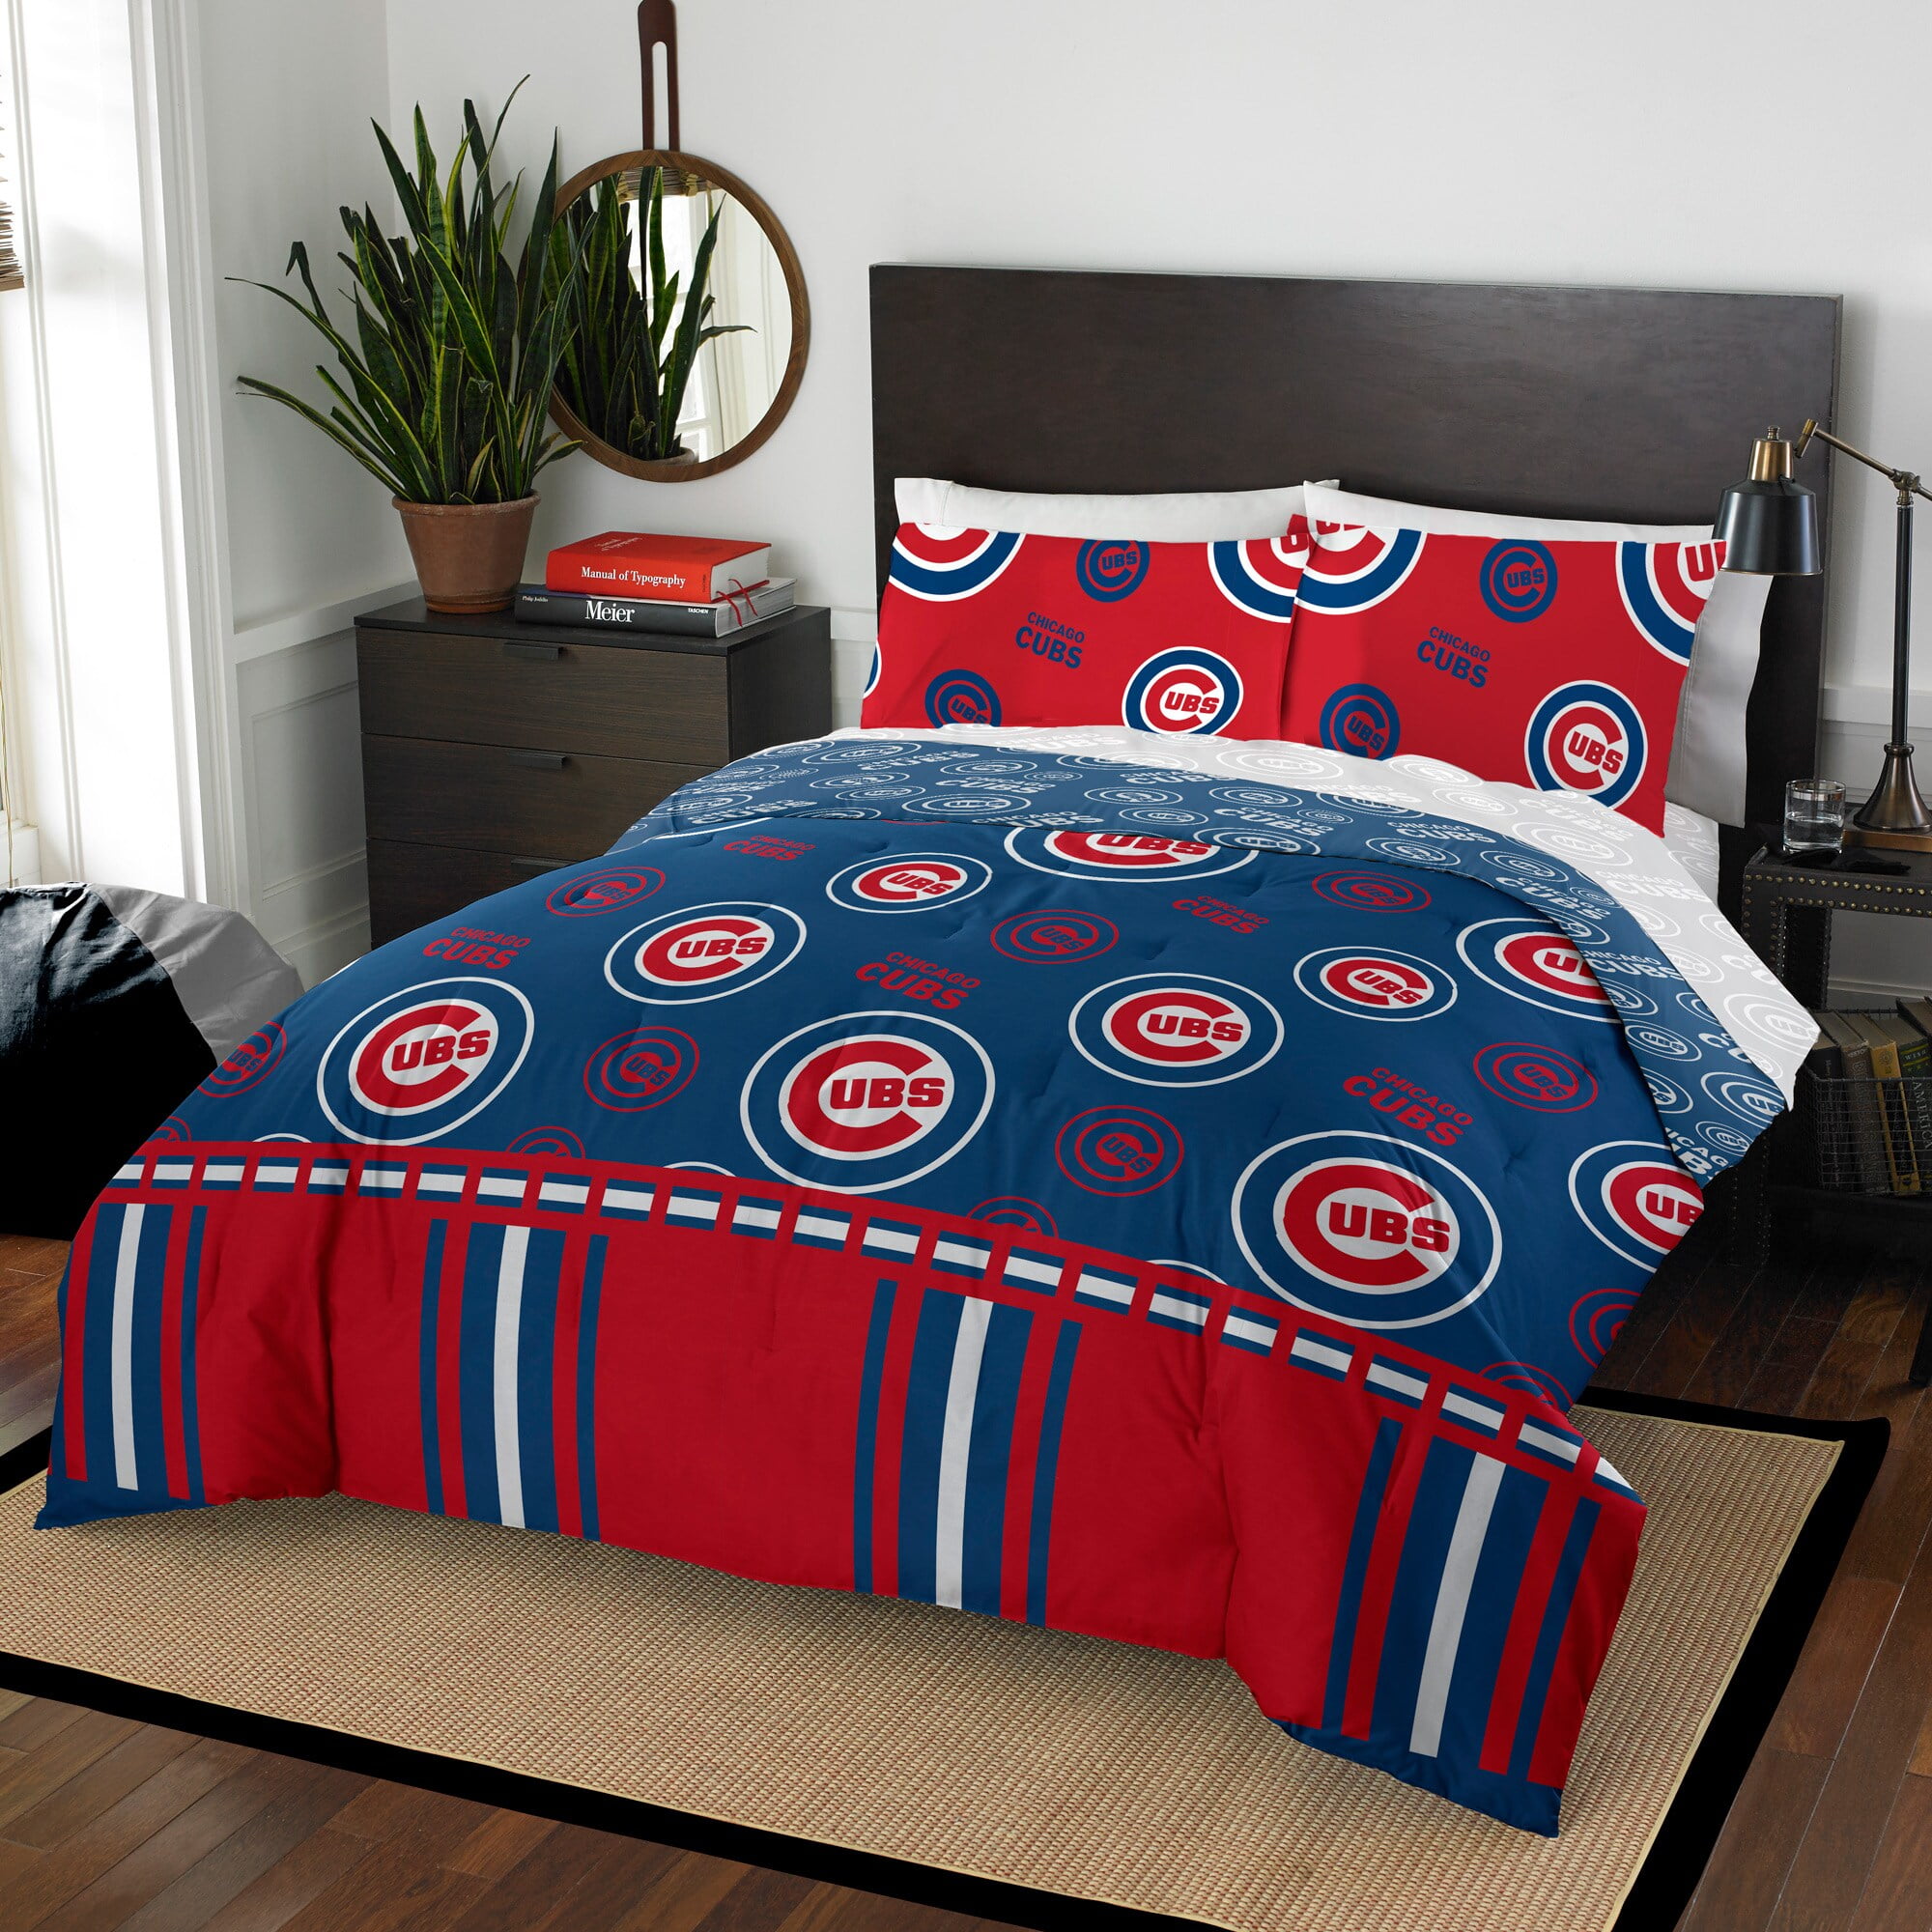 Chicago Cubs 5-Piece Full Bed in a Bag Set $28.80 Walmart